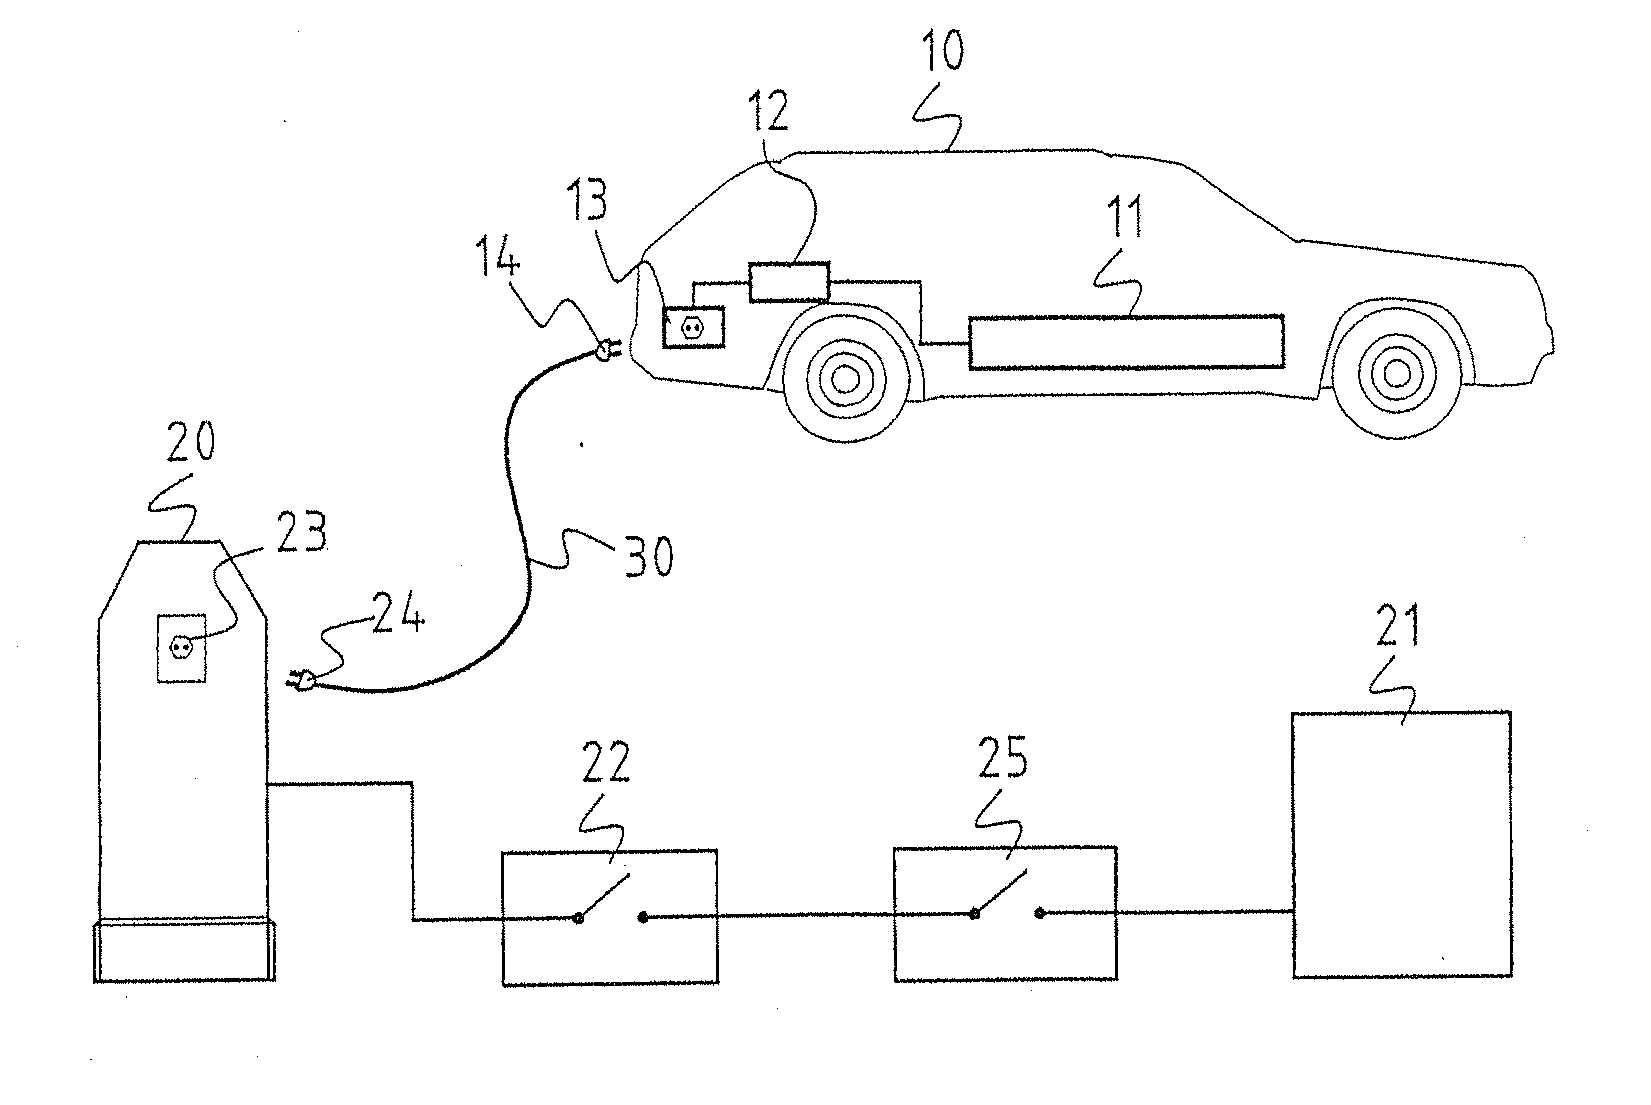 Charging Cable Connector for Connecting an Electric Vehicle to a Charging Station